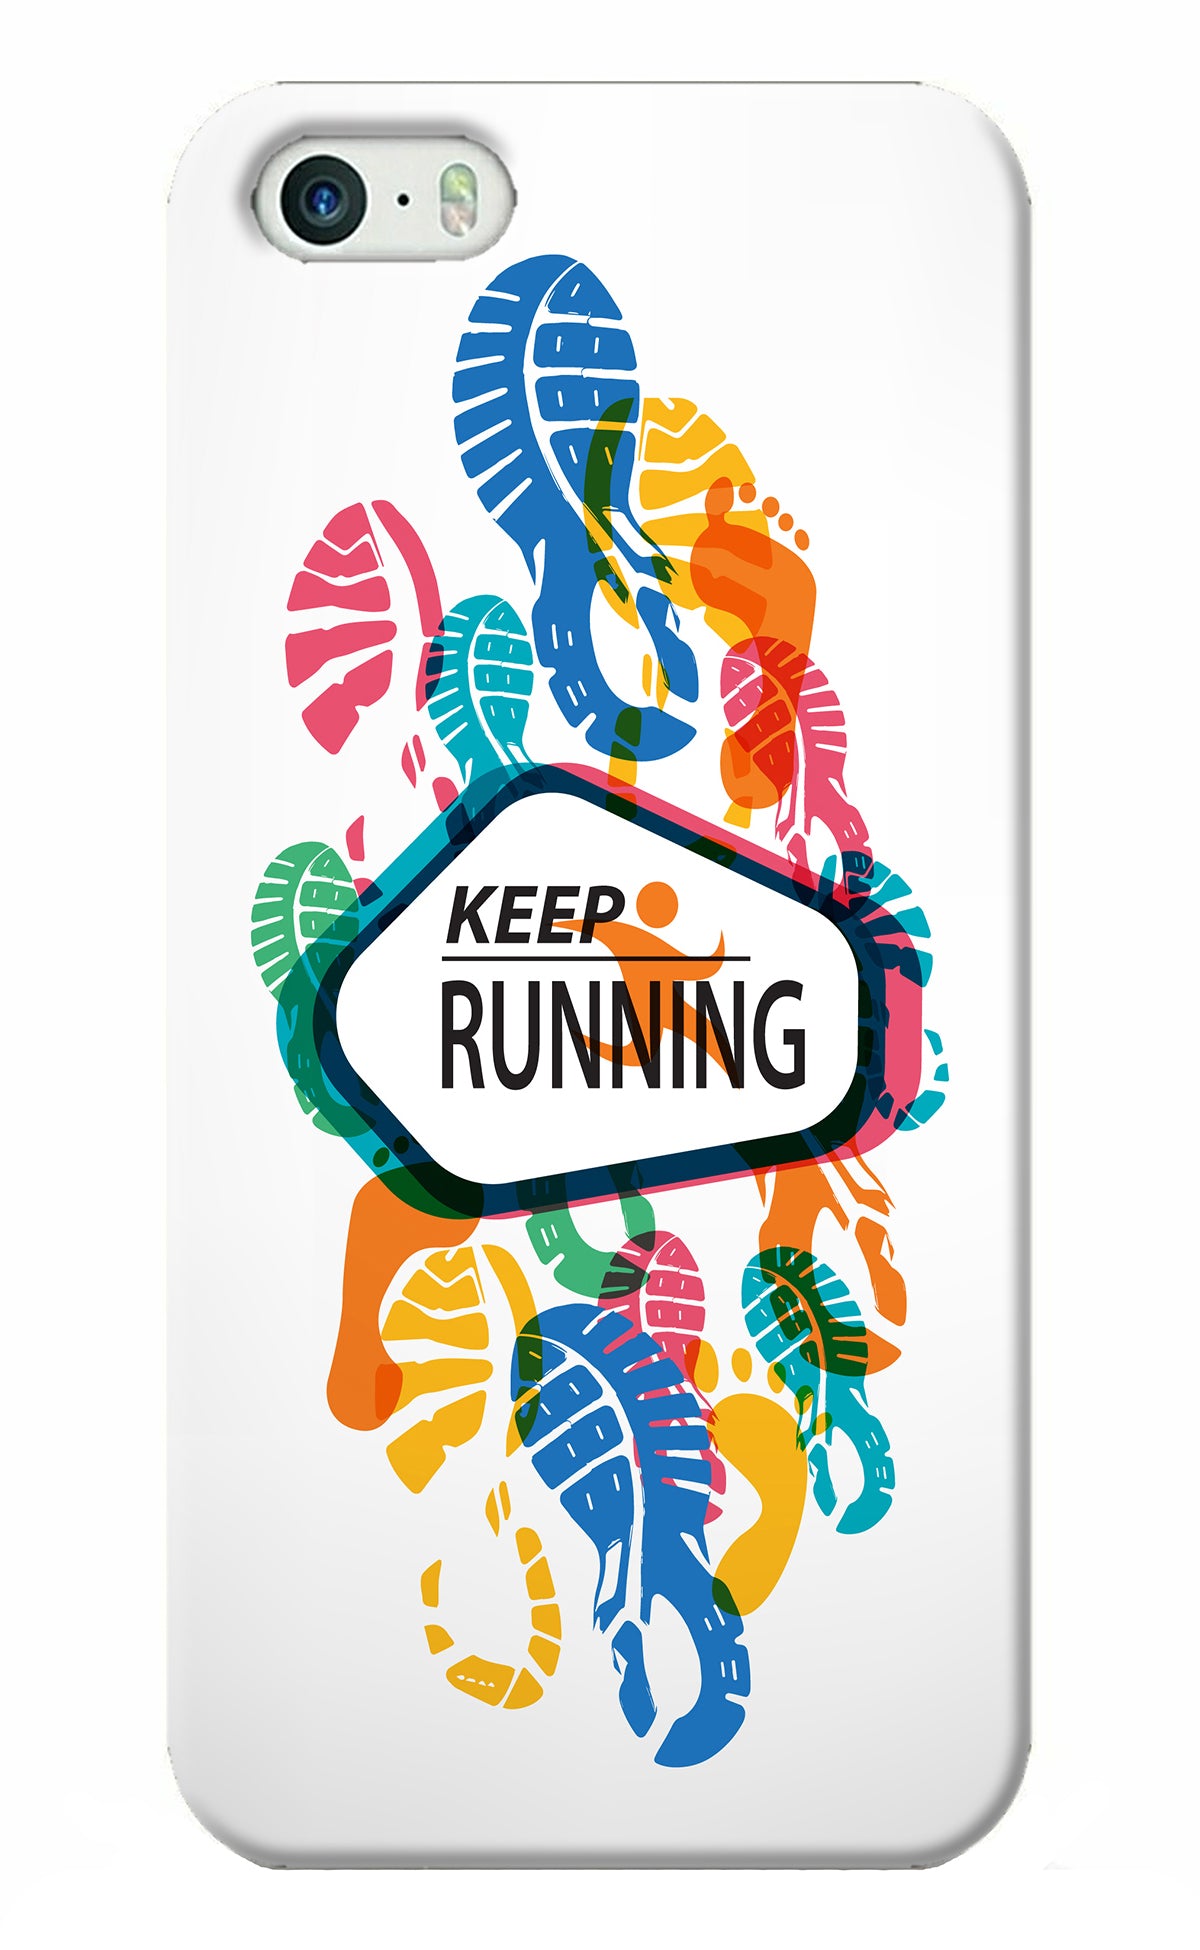 Keep Running iPhone 5/5s Back Cover